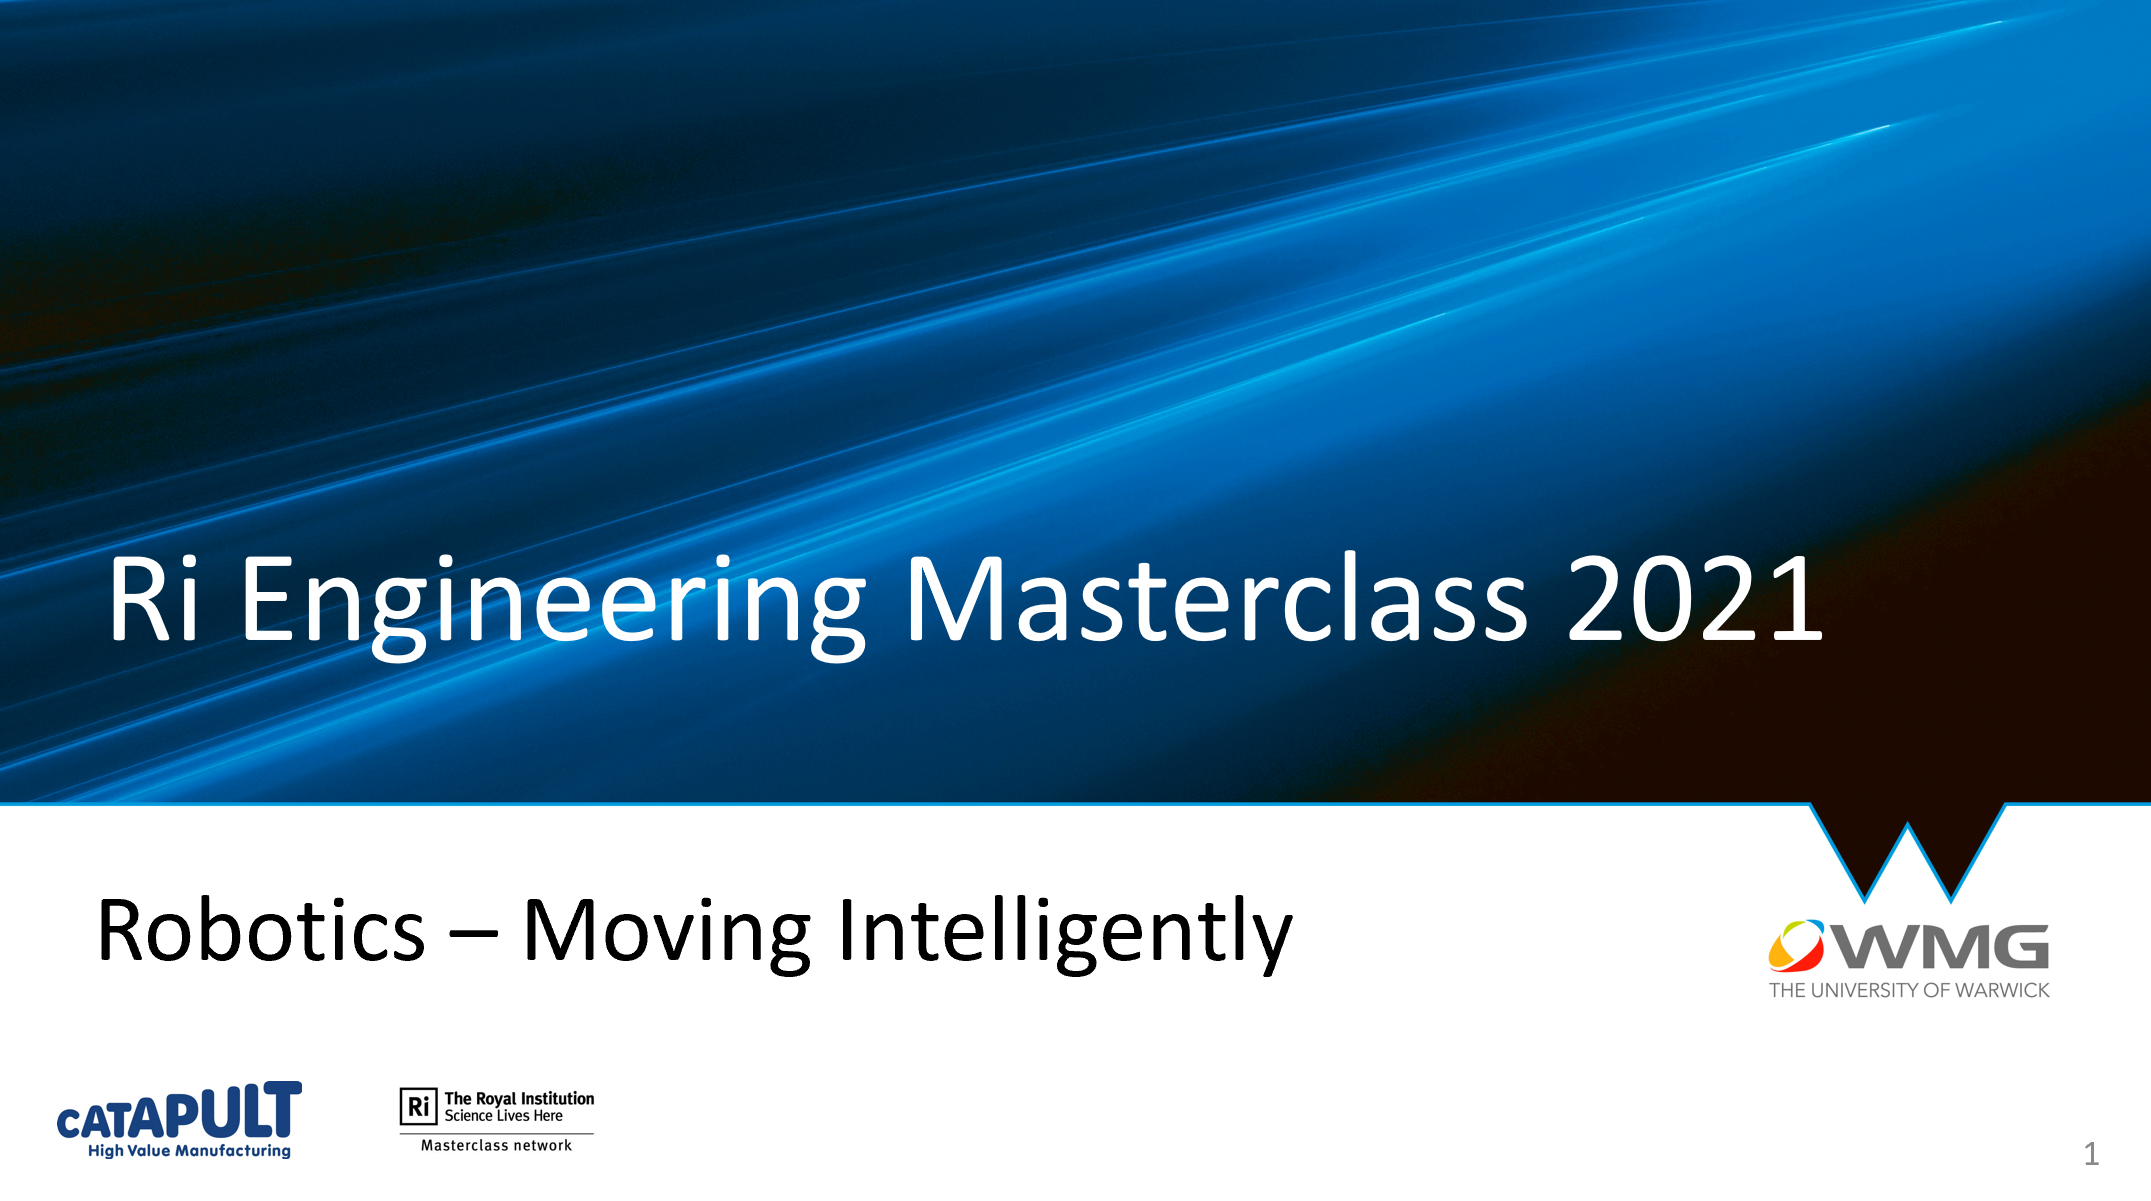 The first page of the workbook for the Ri Engineering Masterclass 2021 hosted by WMG